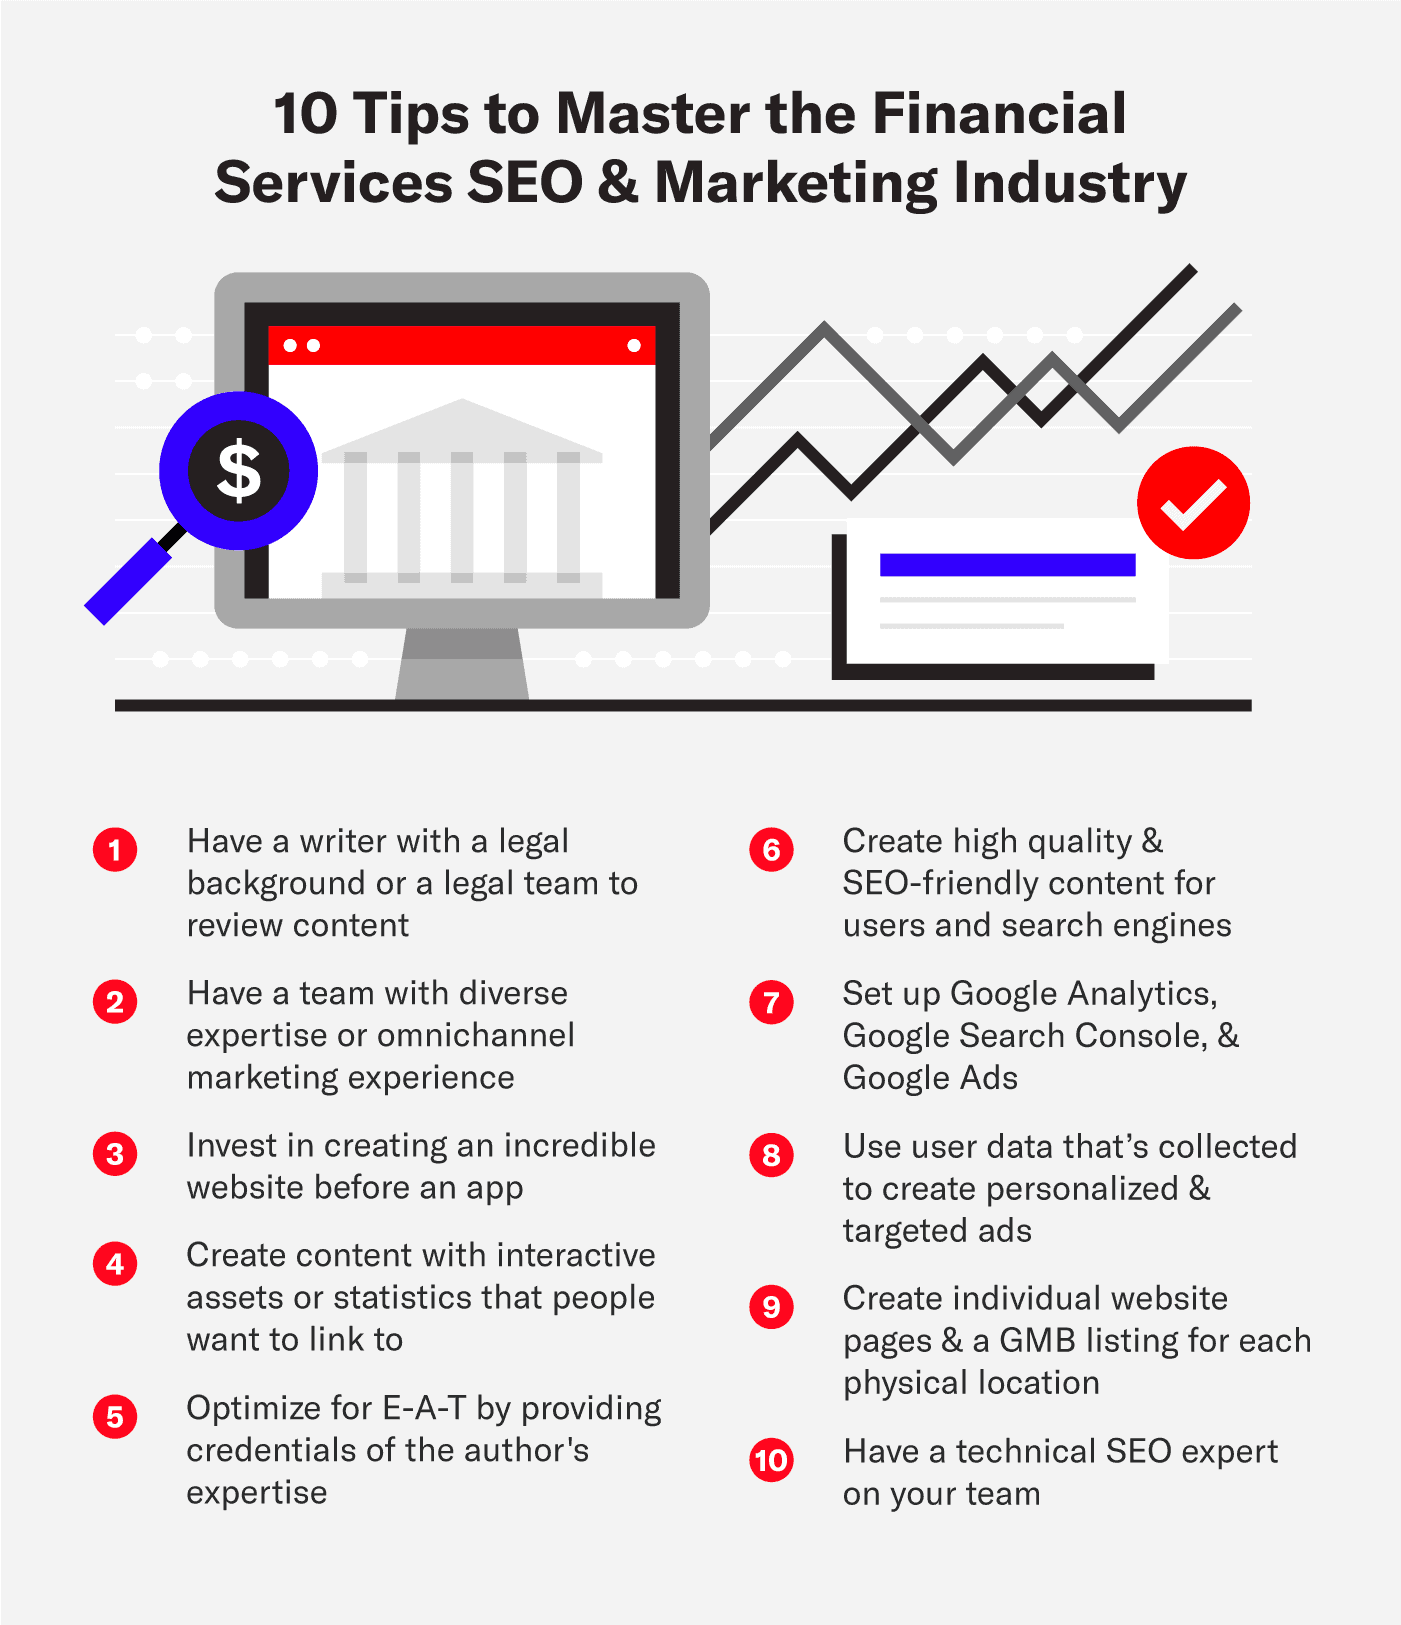 10 tips to master the financial services SEO and marketing industry